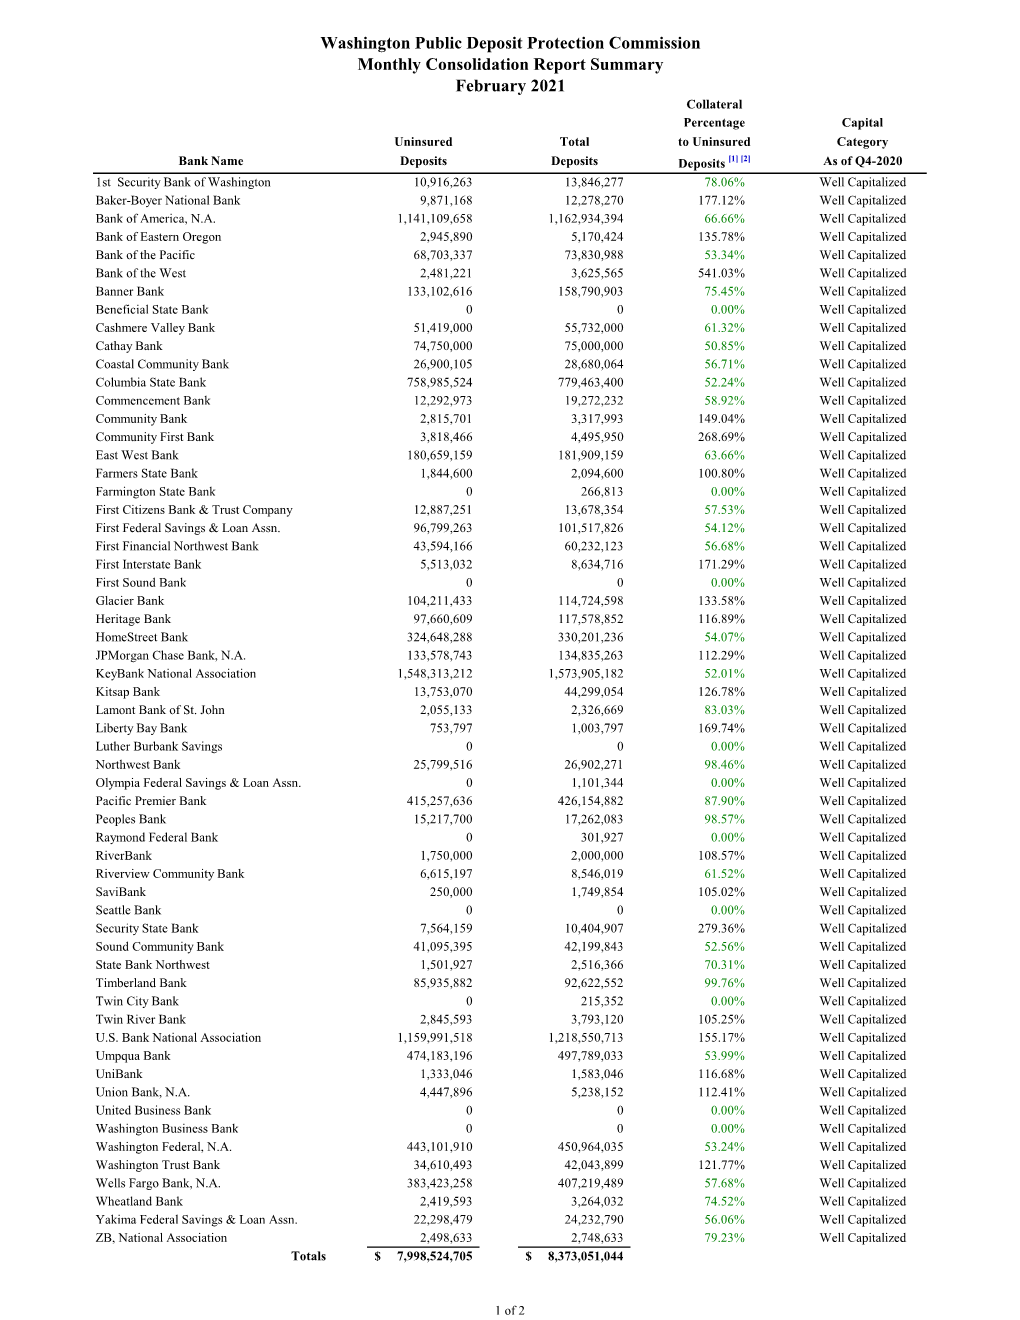 Monthly Consolidation Report Summary 2021-02.Xlsx